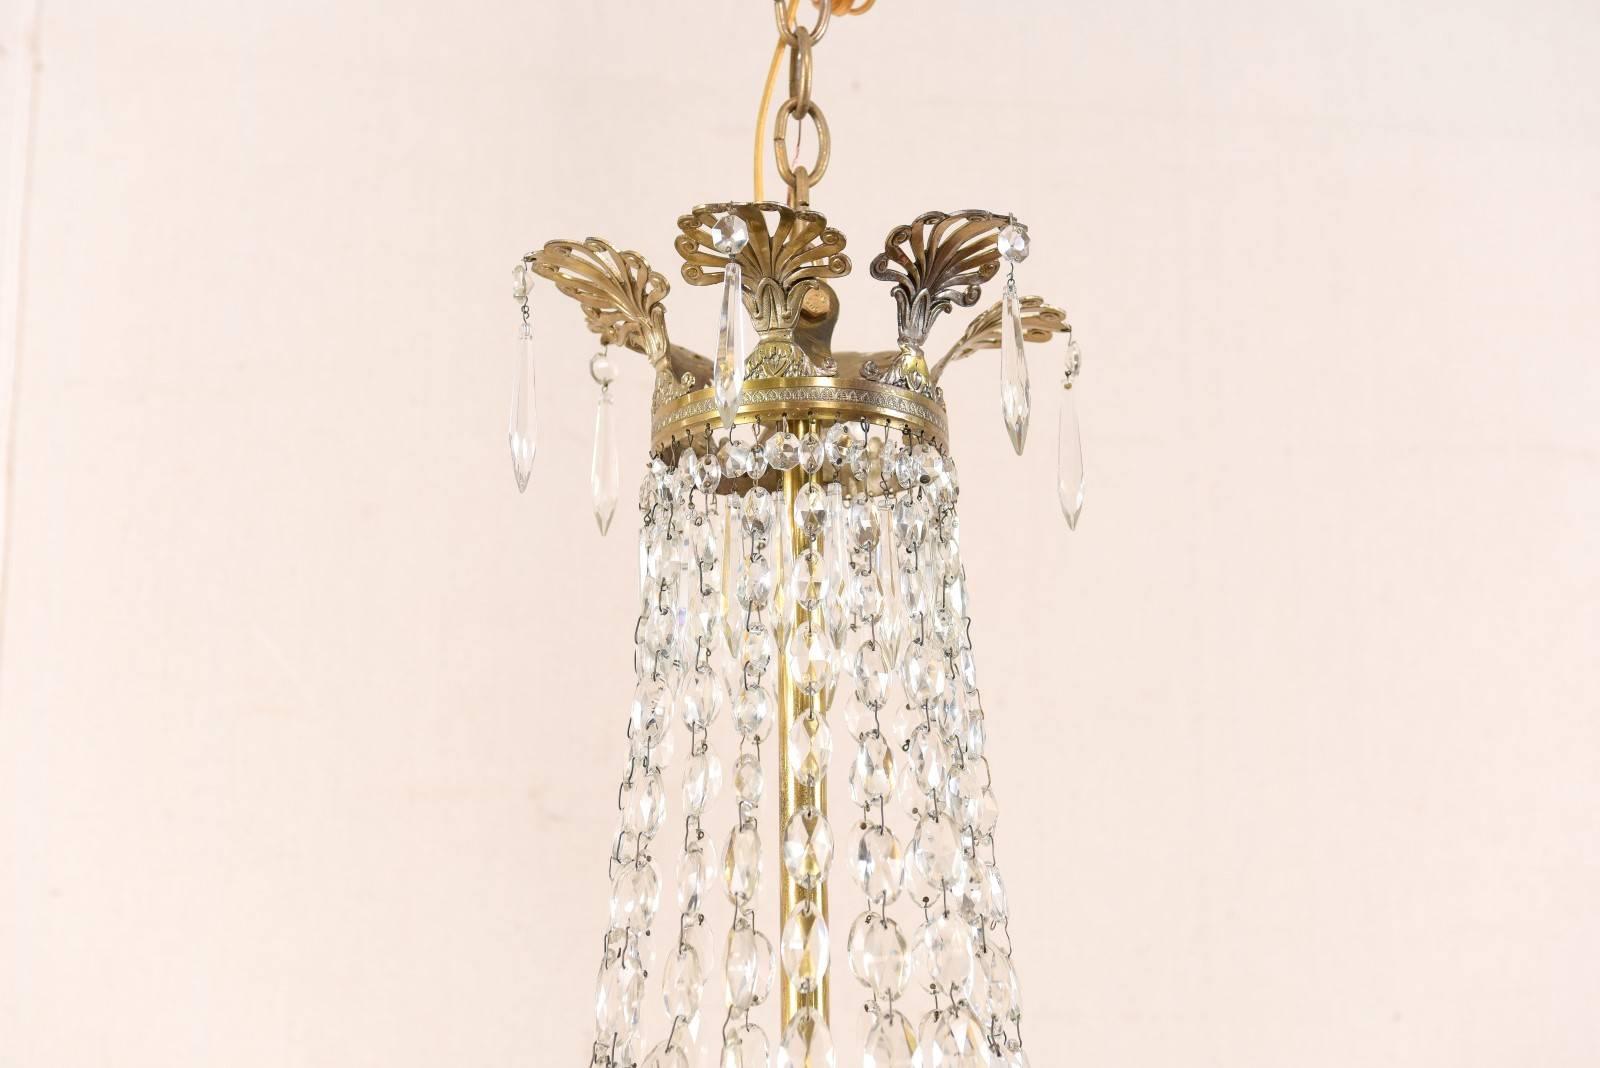 An Exquisite Italian Mid-century Basket-Shaped Crystal and Brass Chandelier In Good Condition For Sale In Atlanta, GA